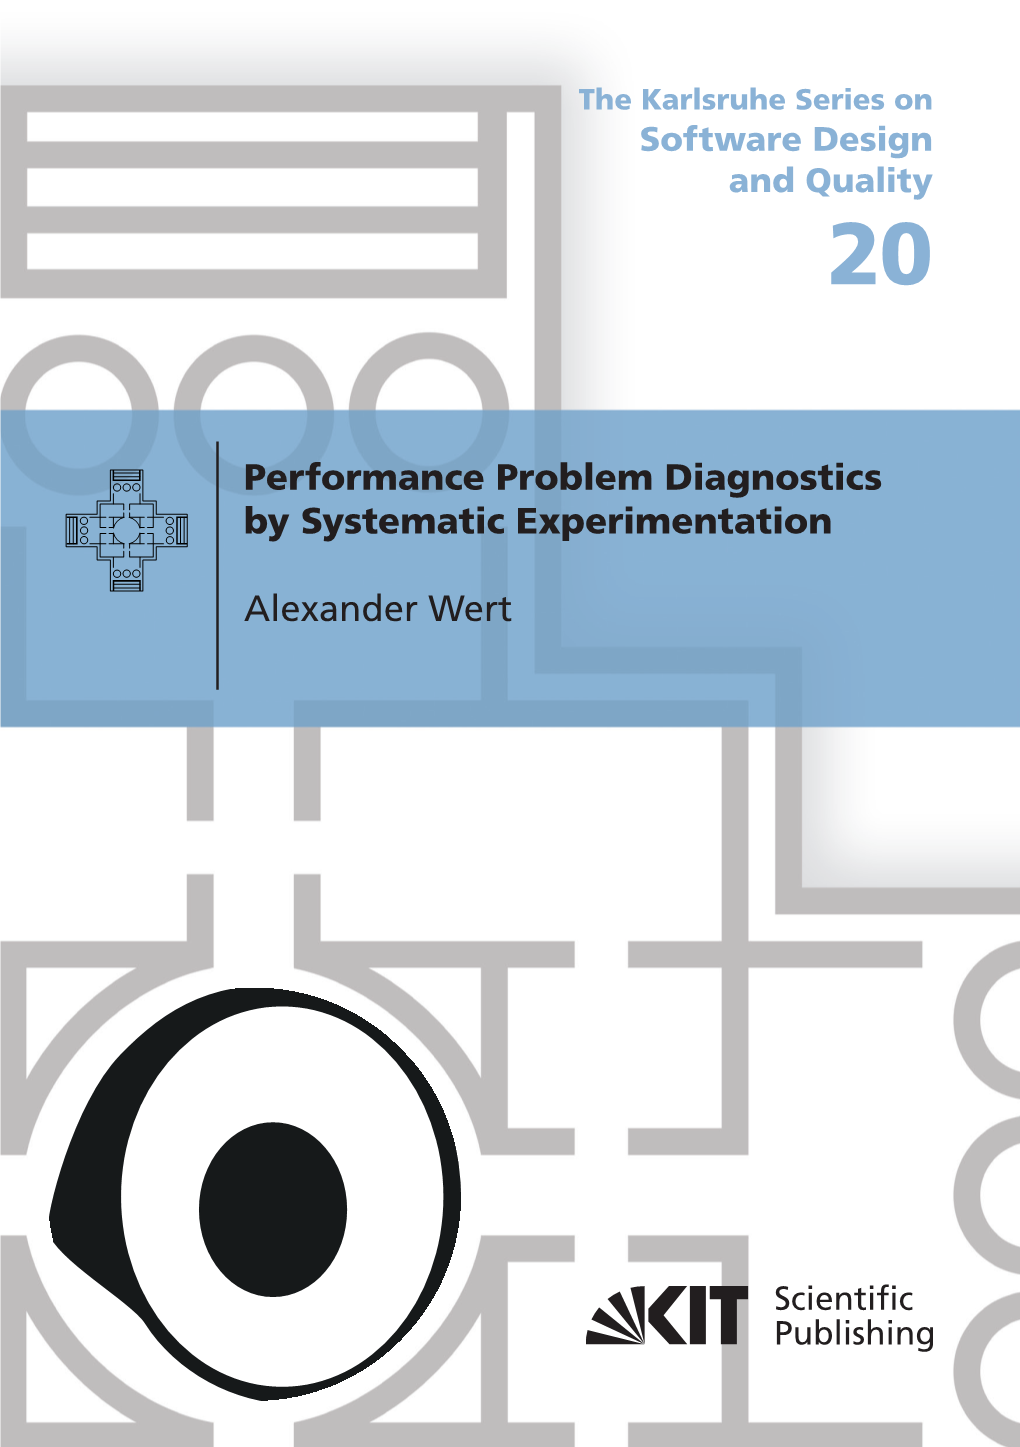 Performance Problem Diagnostics by Systematic Experimentation